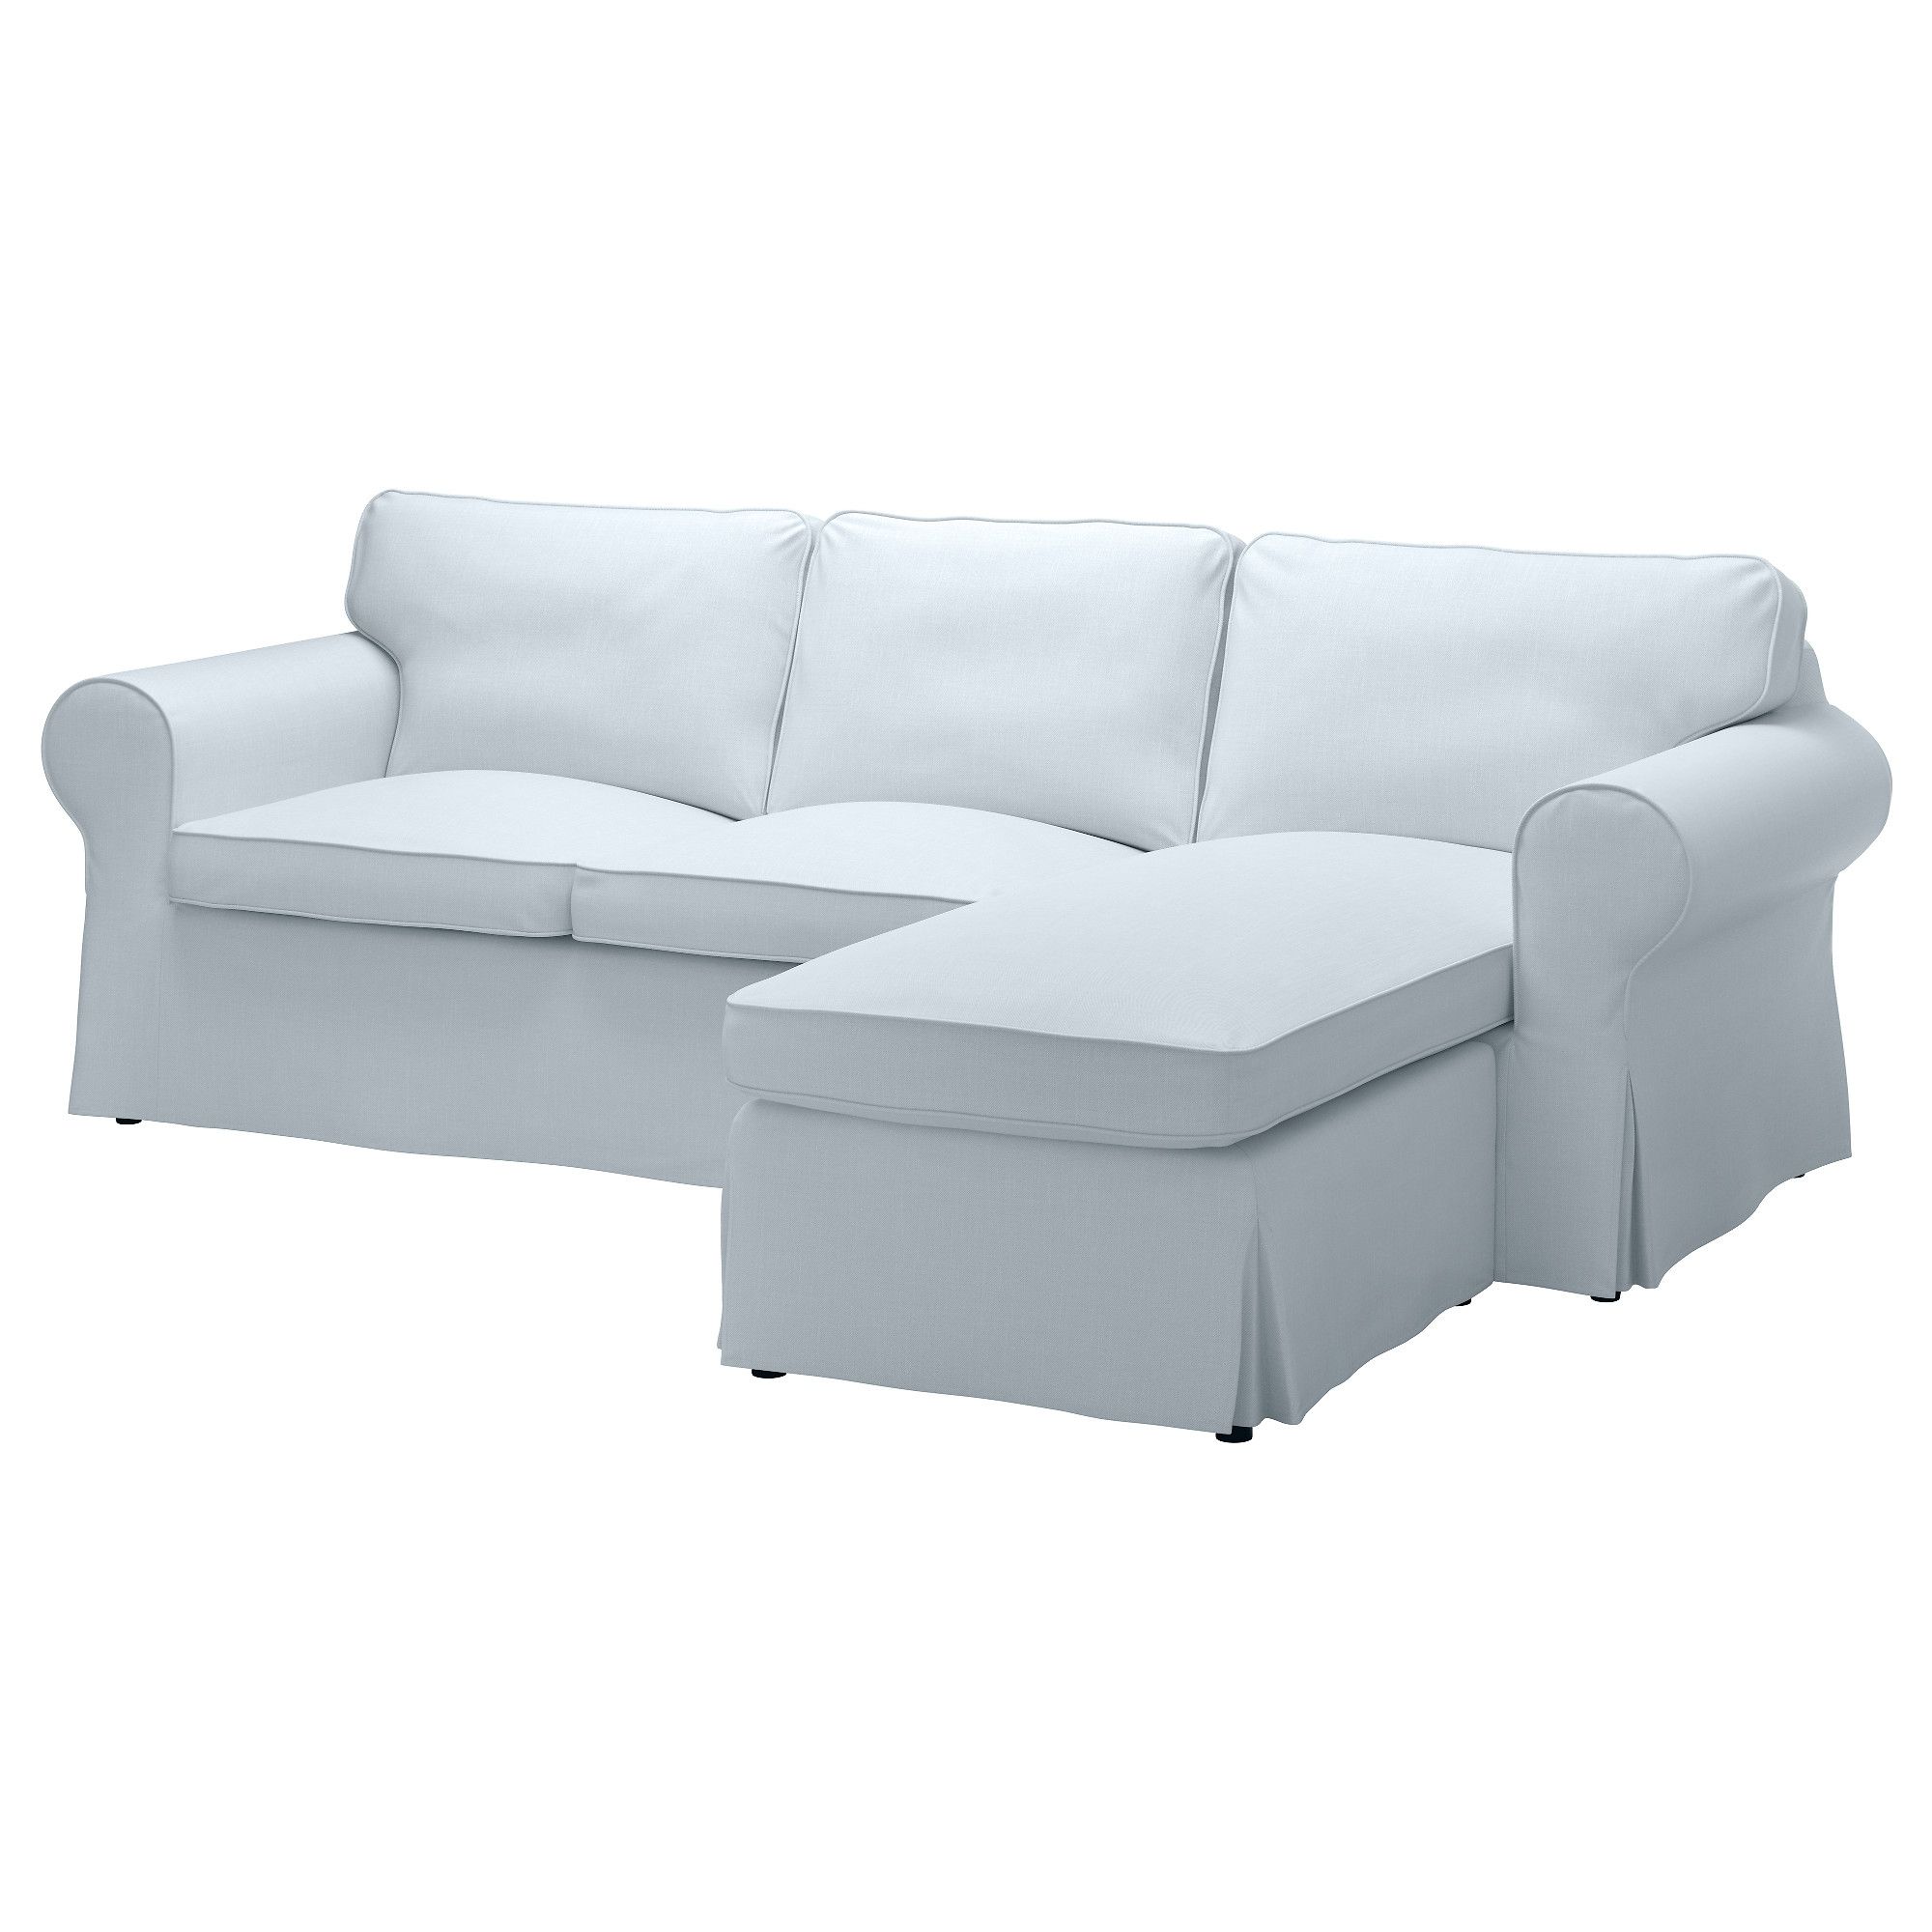 Small Sectional Sofa Ikea 80 With Small Sectional Sofa Ikea Regarding Sectional Sofas At Ikea (Photo 8 of 10)